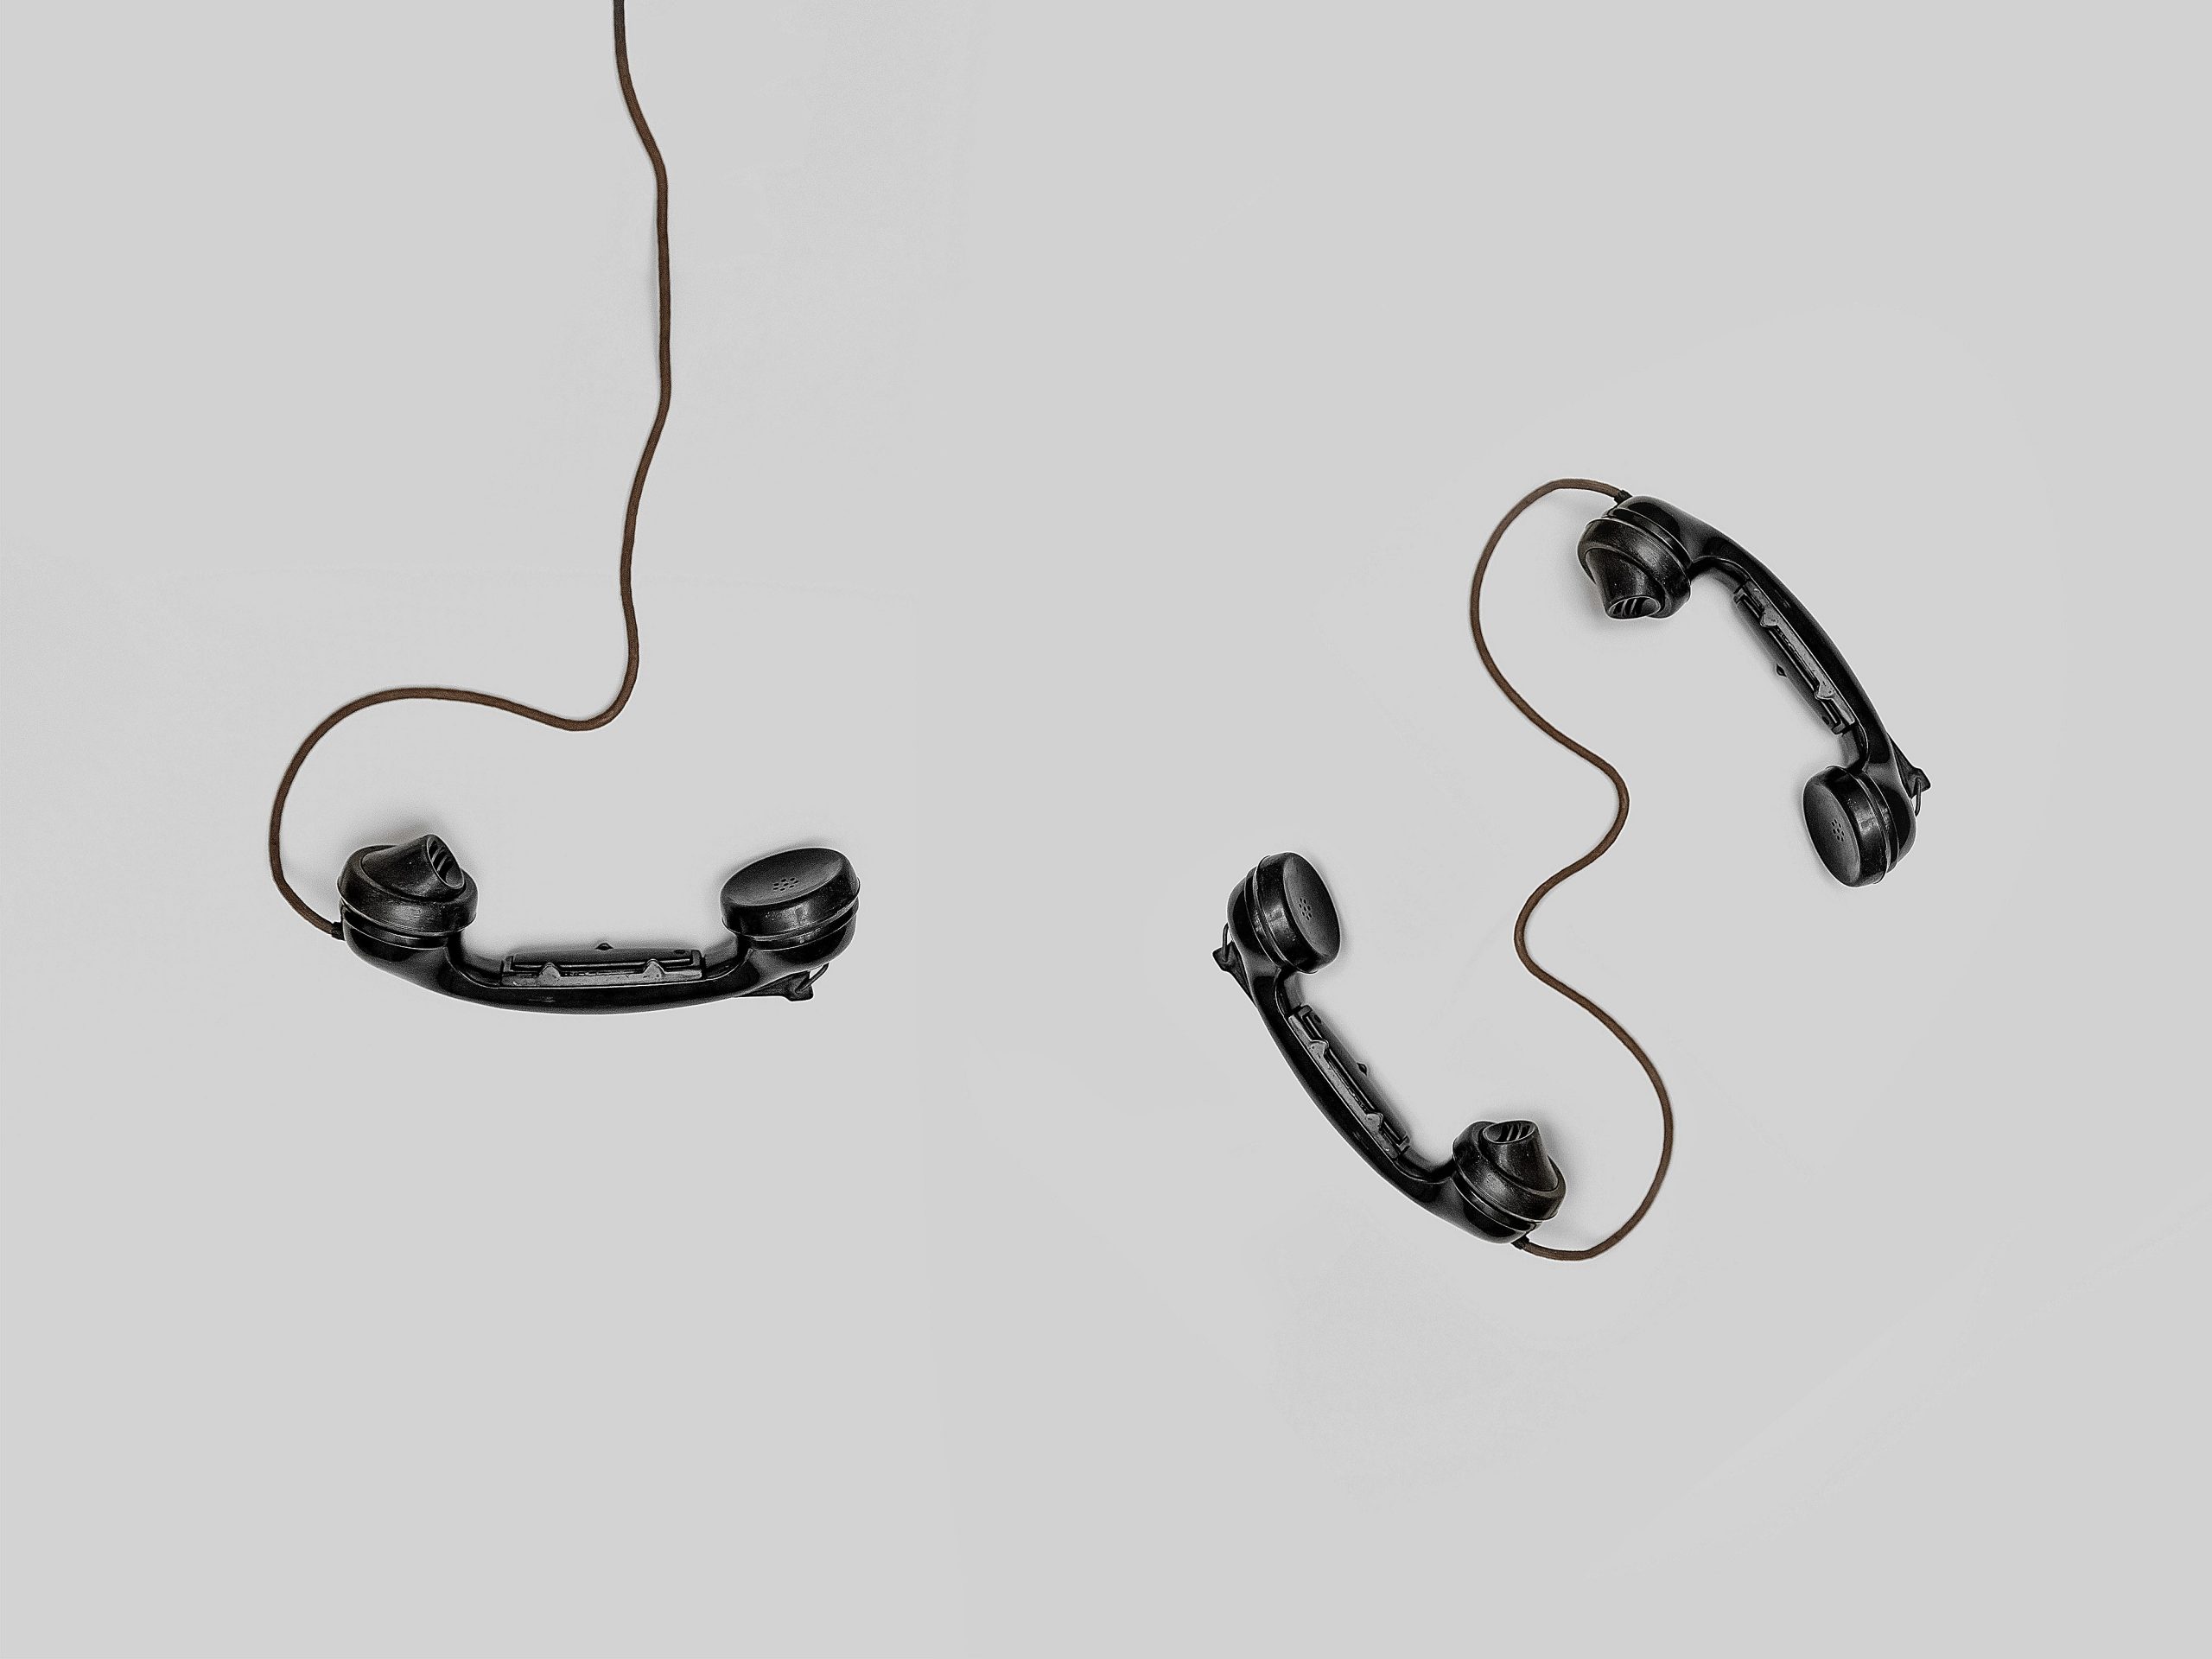 Three telephones with leads attached